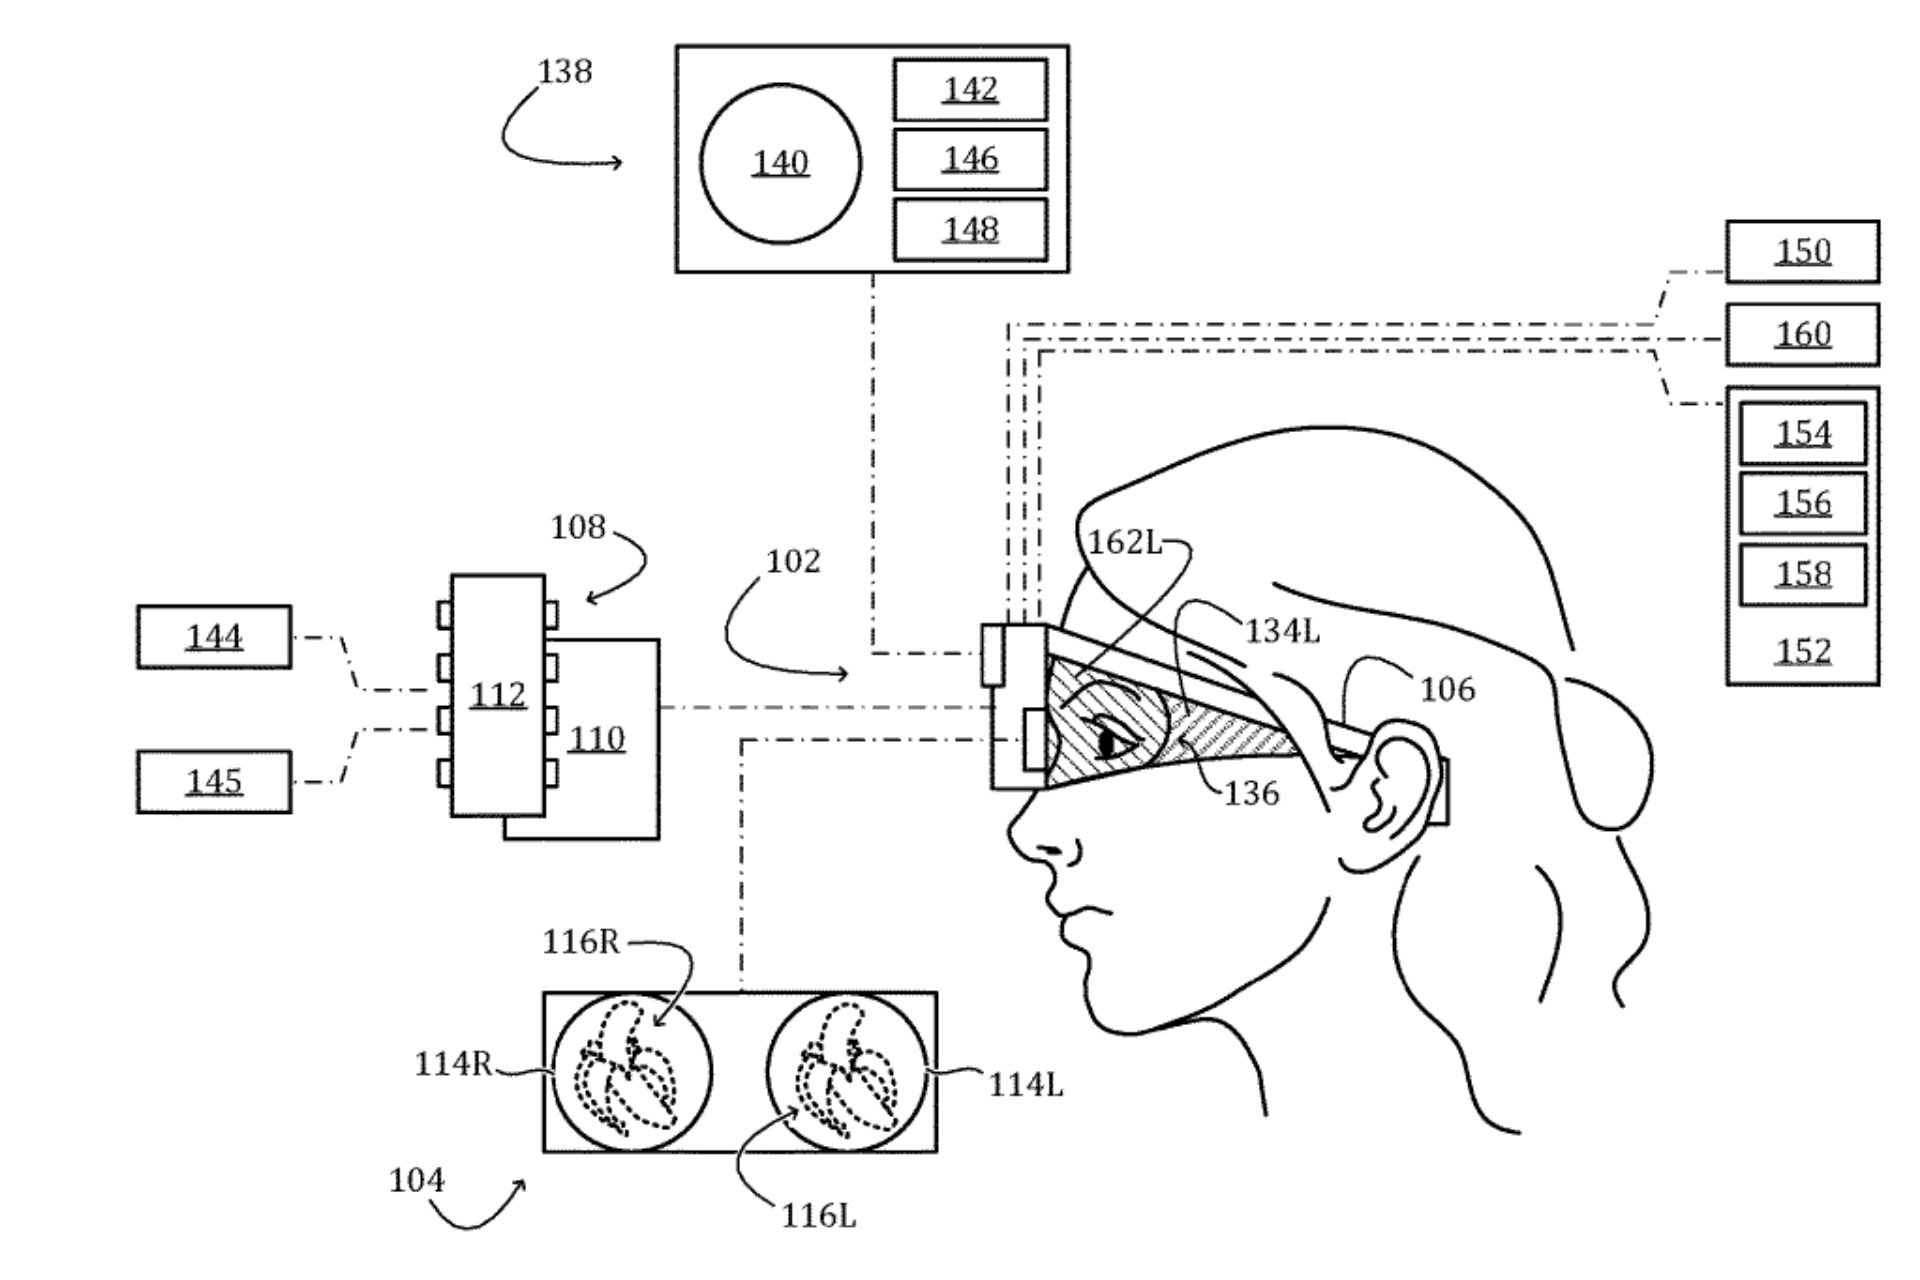 Microsoft’s latest patent describes a VR/AR headset capable of adjusting the level of reality displayed on their screen